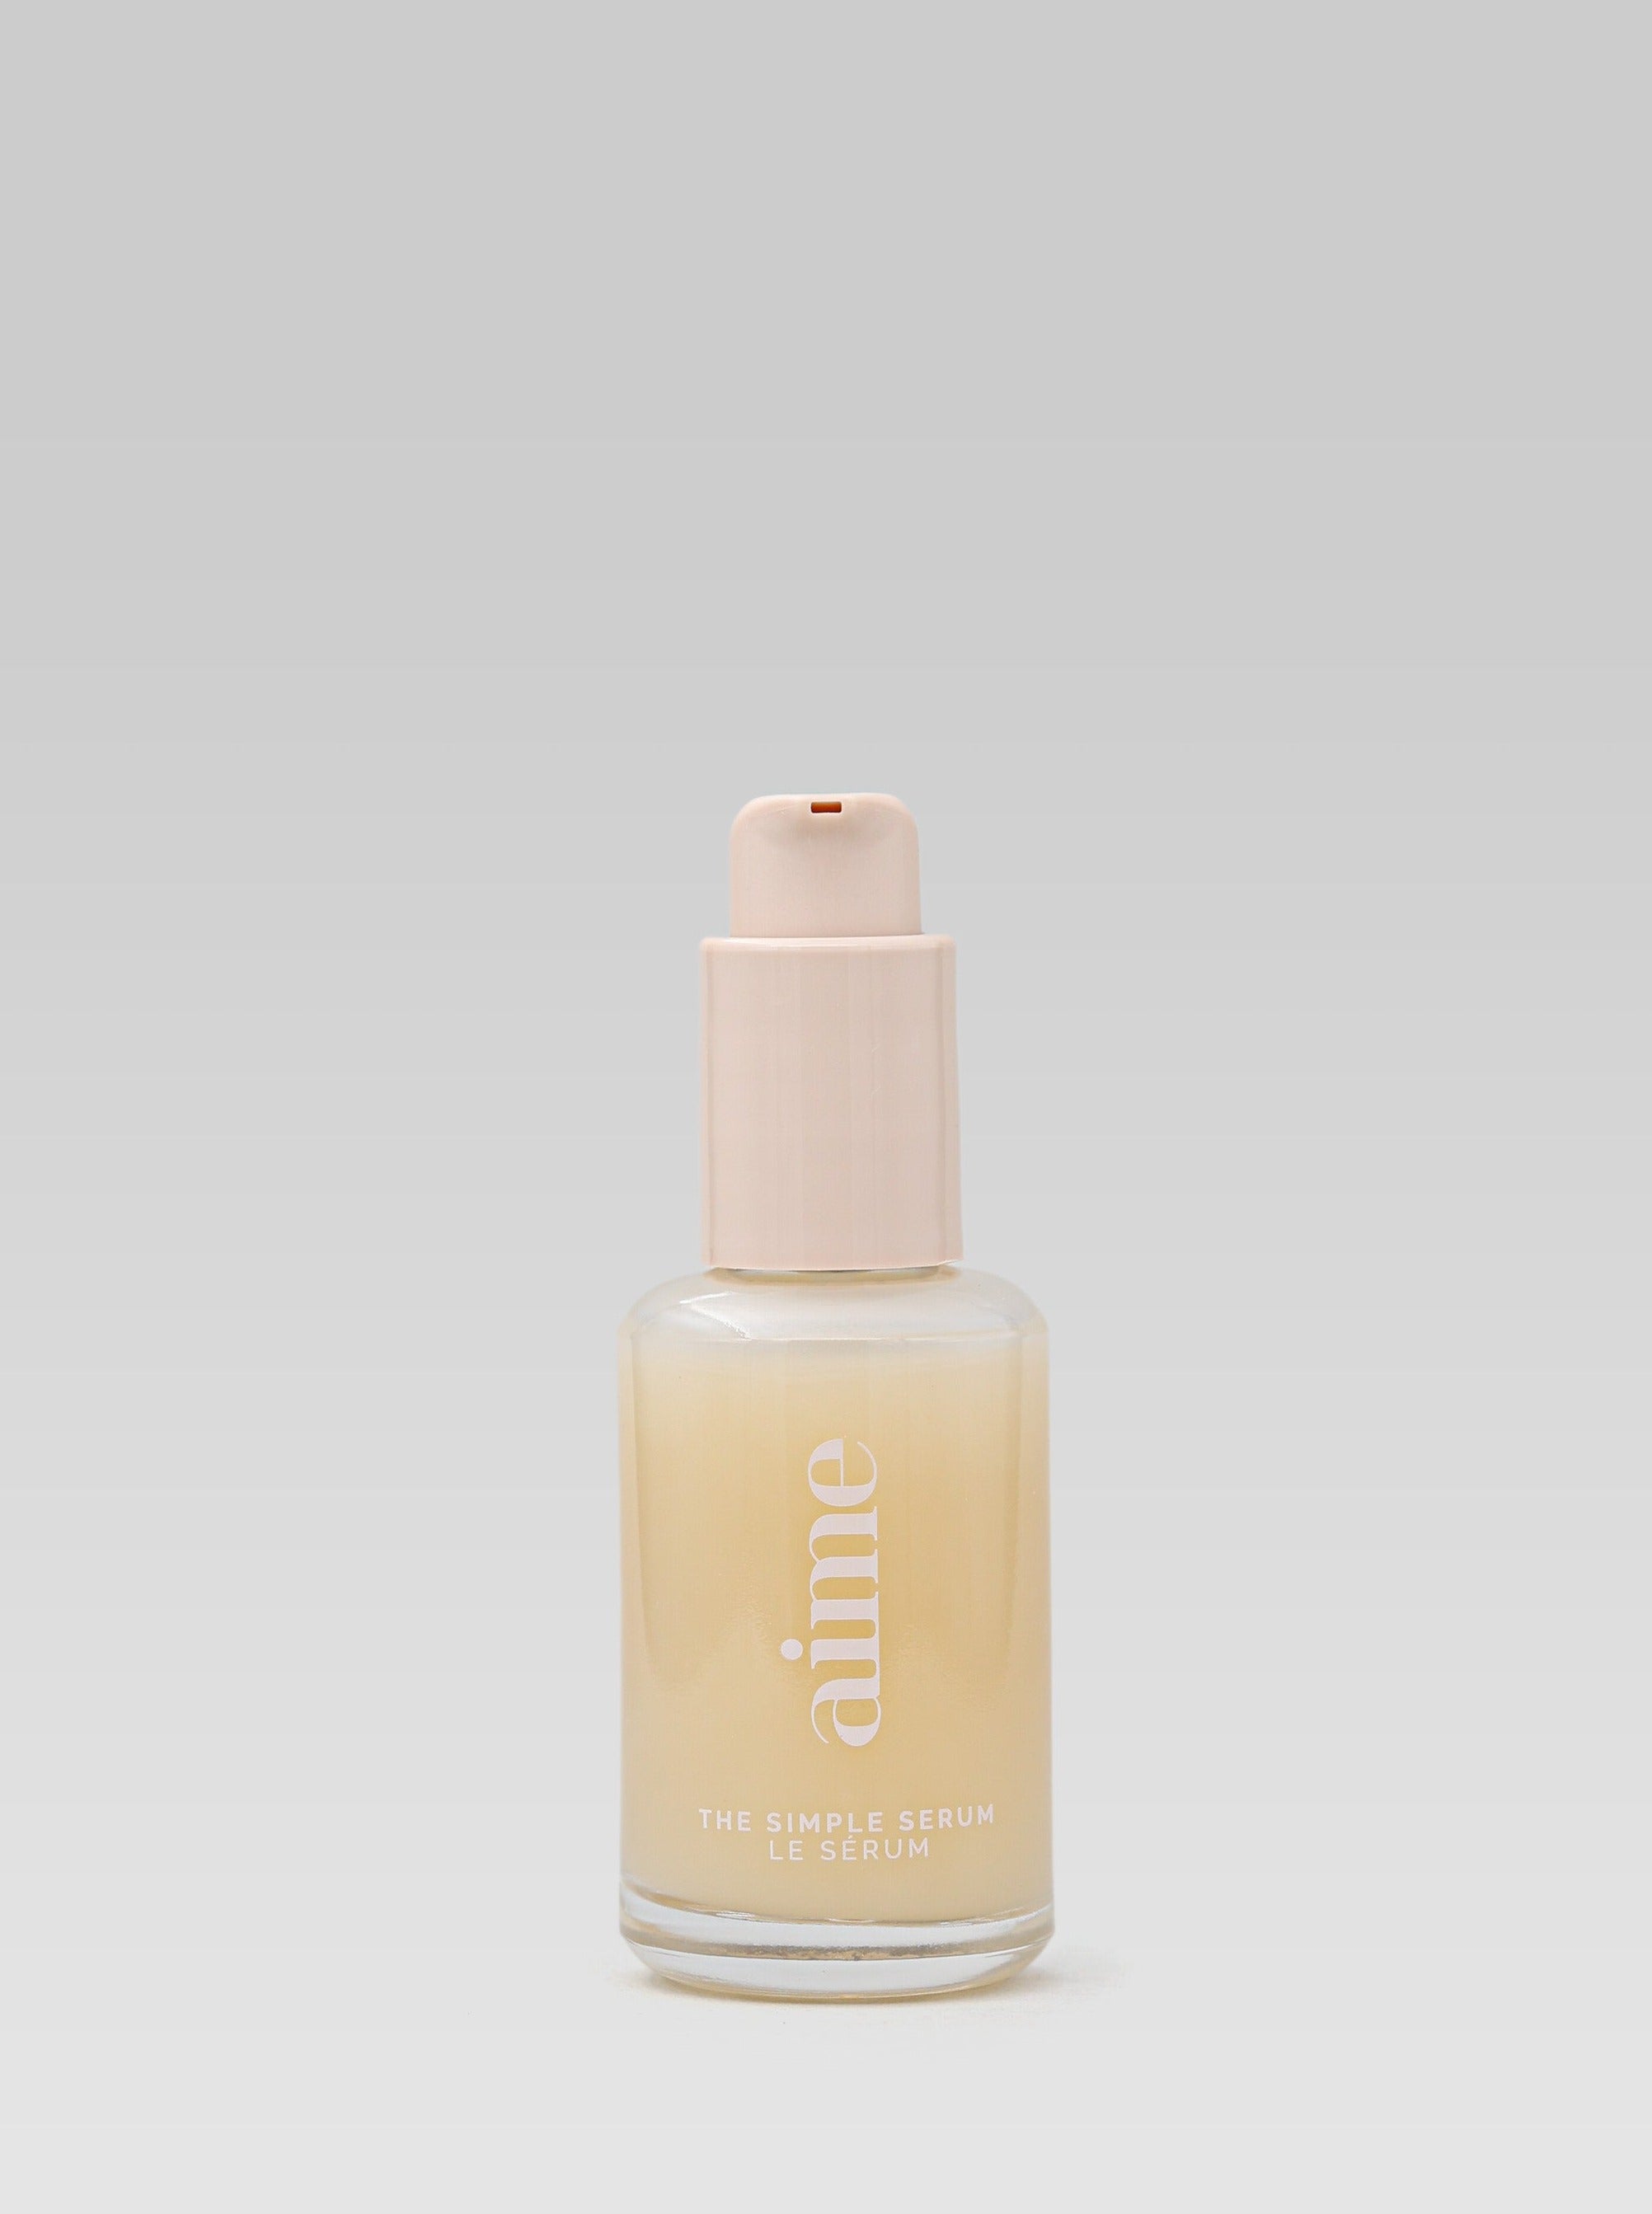 Aime The Simple Serum product shot